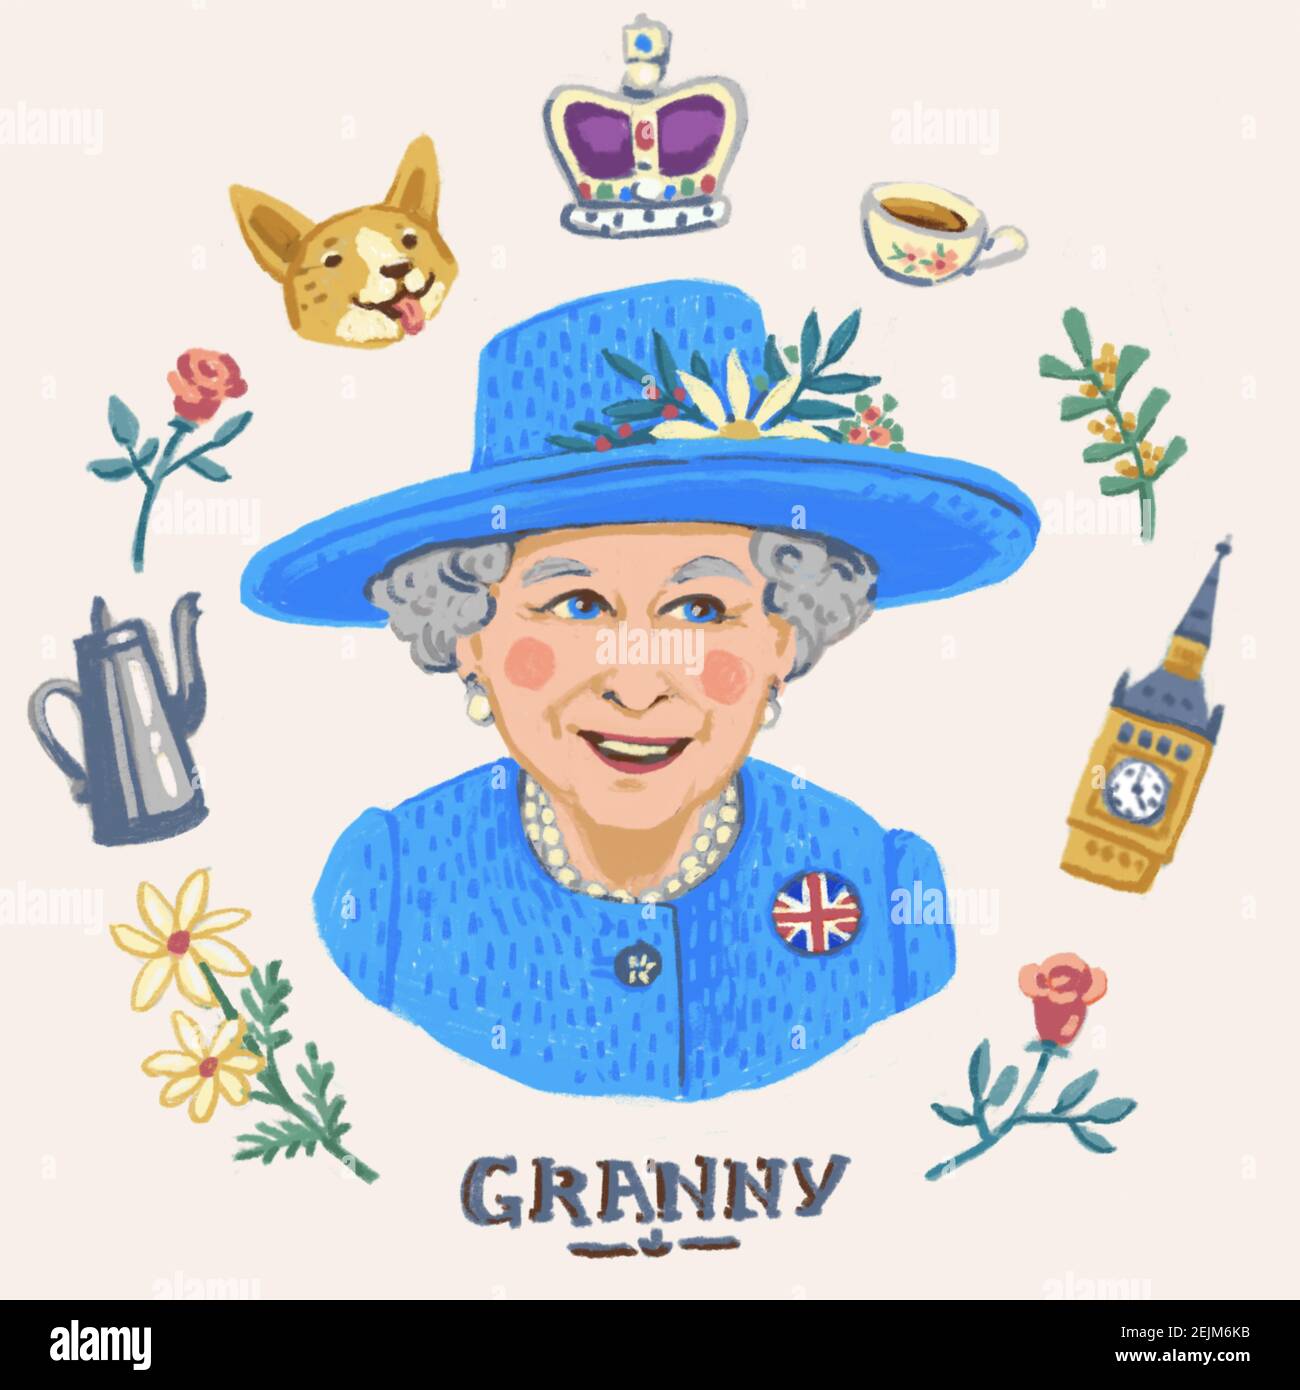 MAY 4 2018 ENGLAND: Her Royal Highness Queen Elizabeth II. Elizabeth II Elizabeth Alexandra Mary, Queen of the United Kingdom, Canada, Australia, and Stock Photo